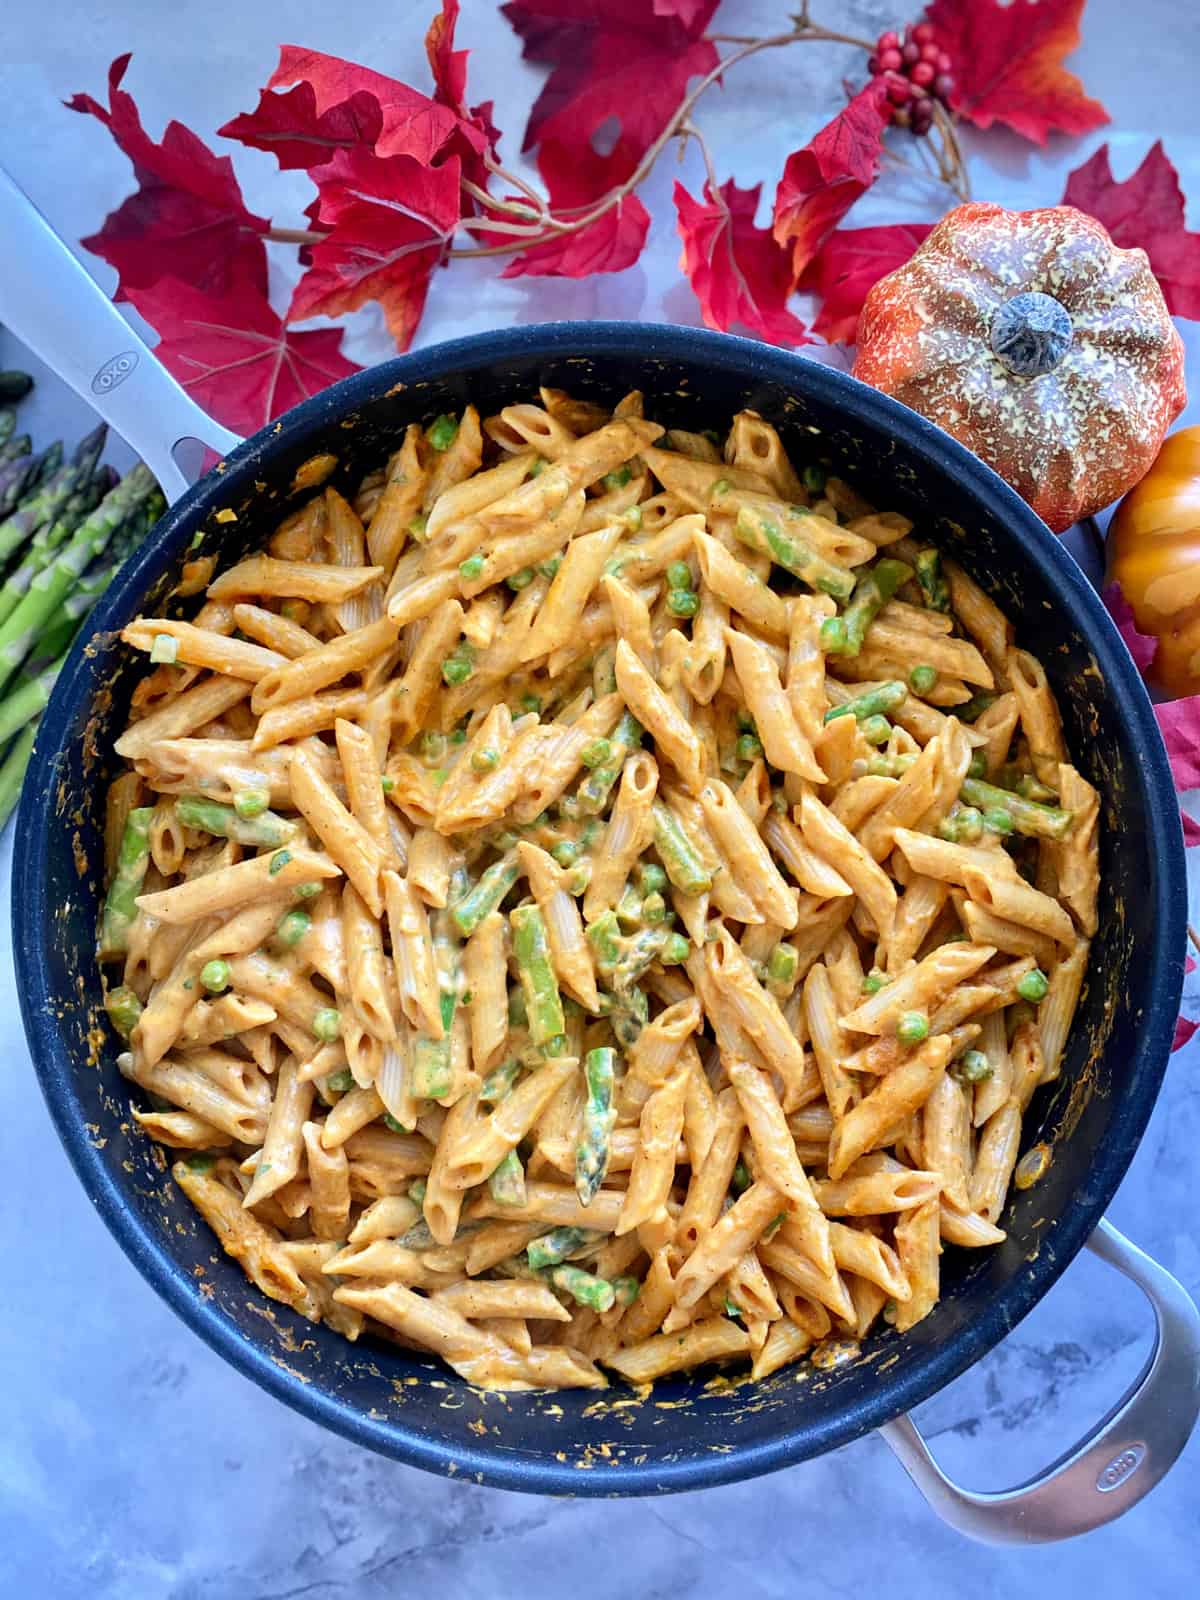 Top view of a large skilelt filled with creamy orange pasta with peas and asparagus.